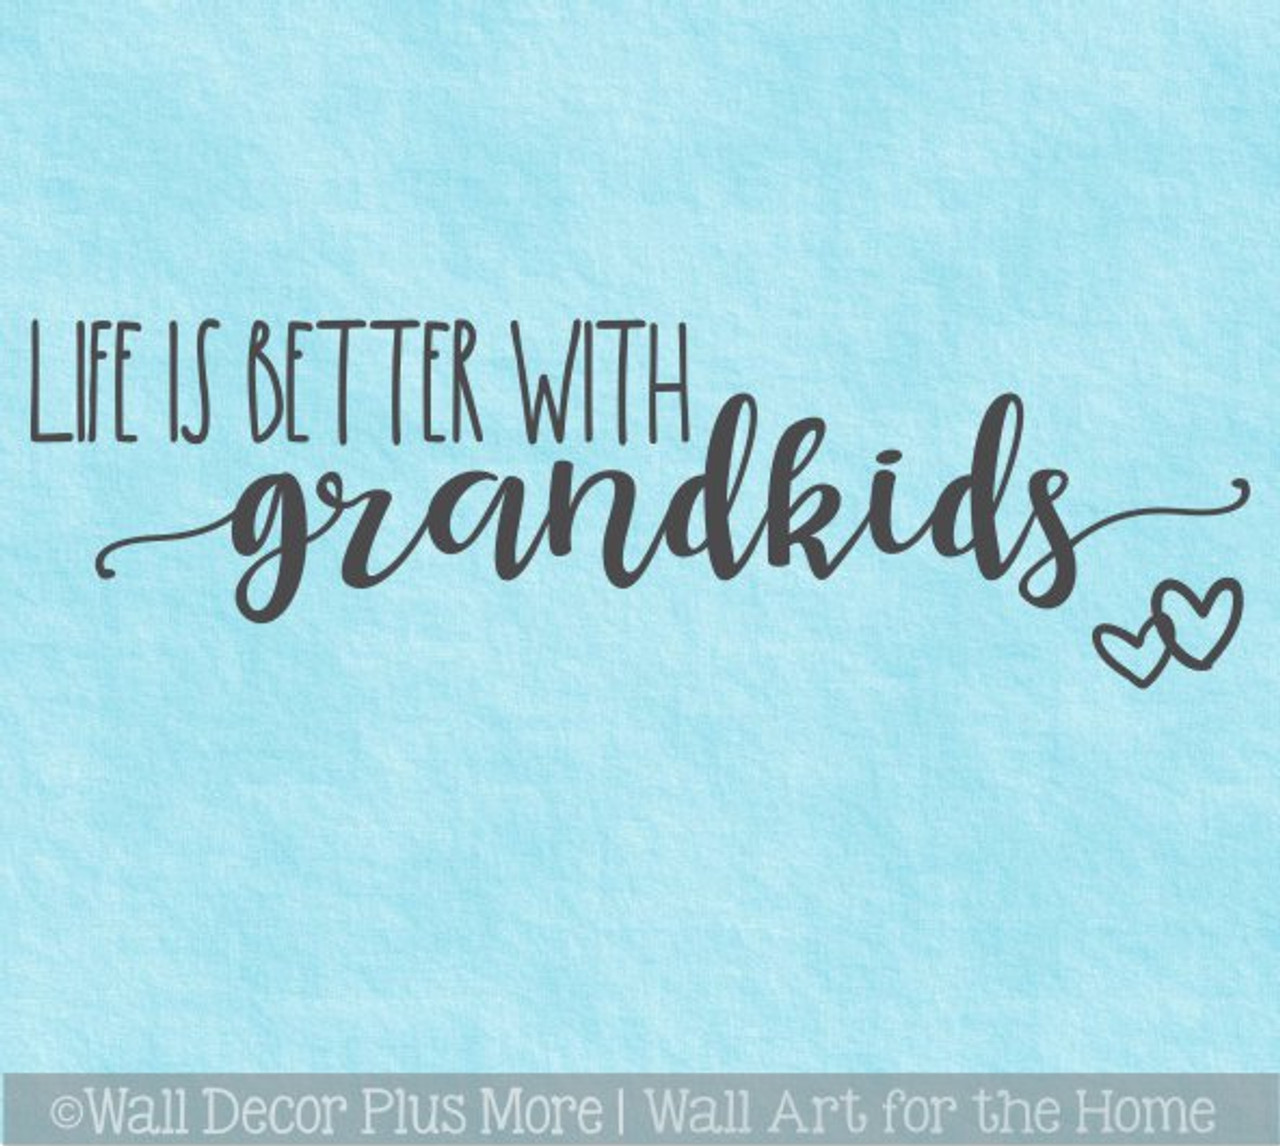 Life is Better with Grandkids Wall Decal Quote Sticker Decor Words